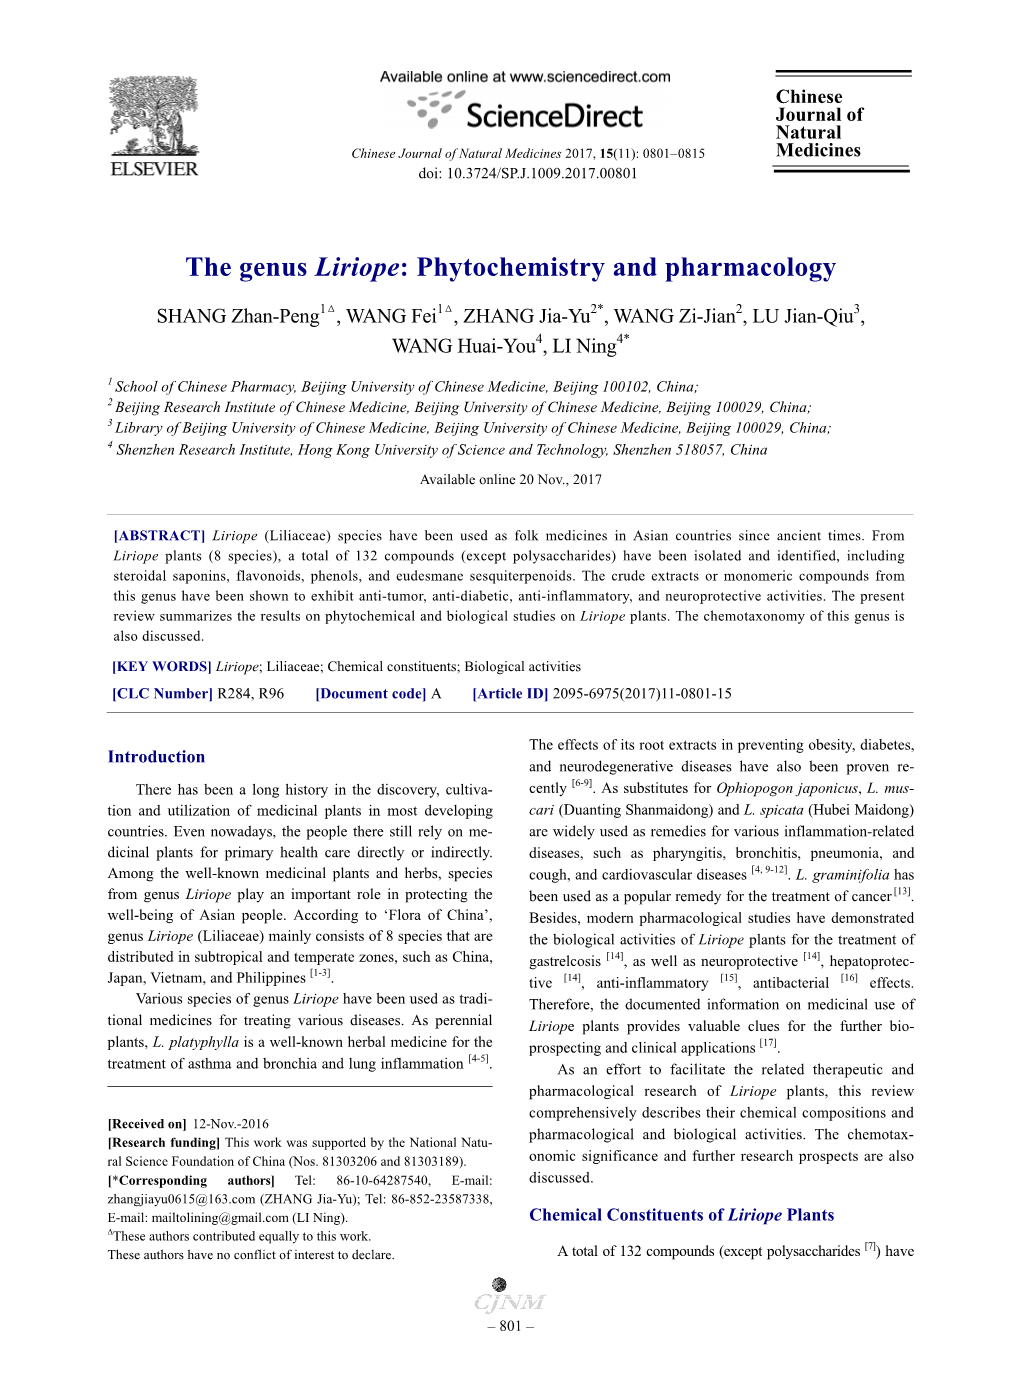 The Genus Liriope: Phytochemistry and Pharmacology